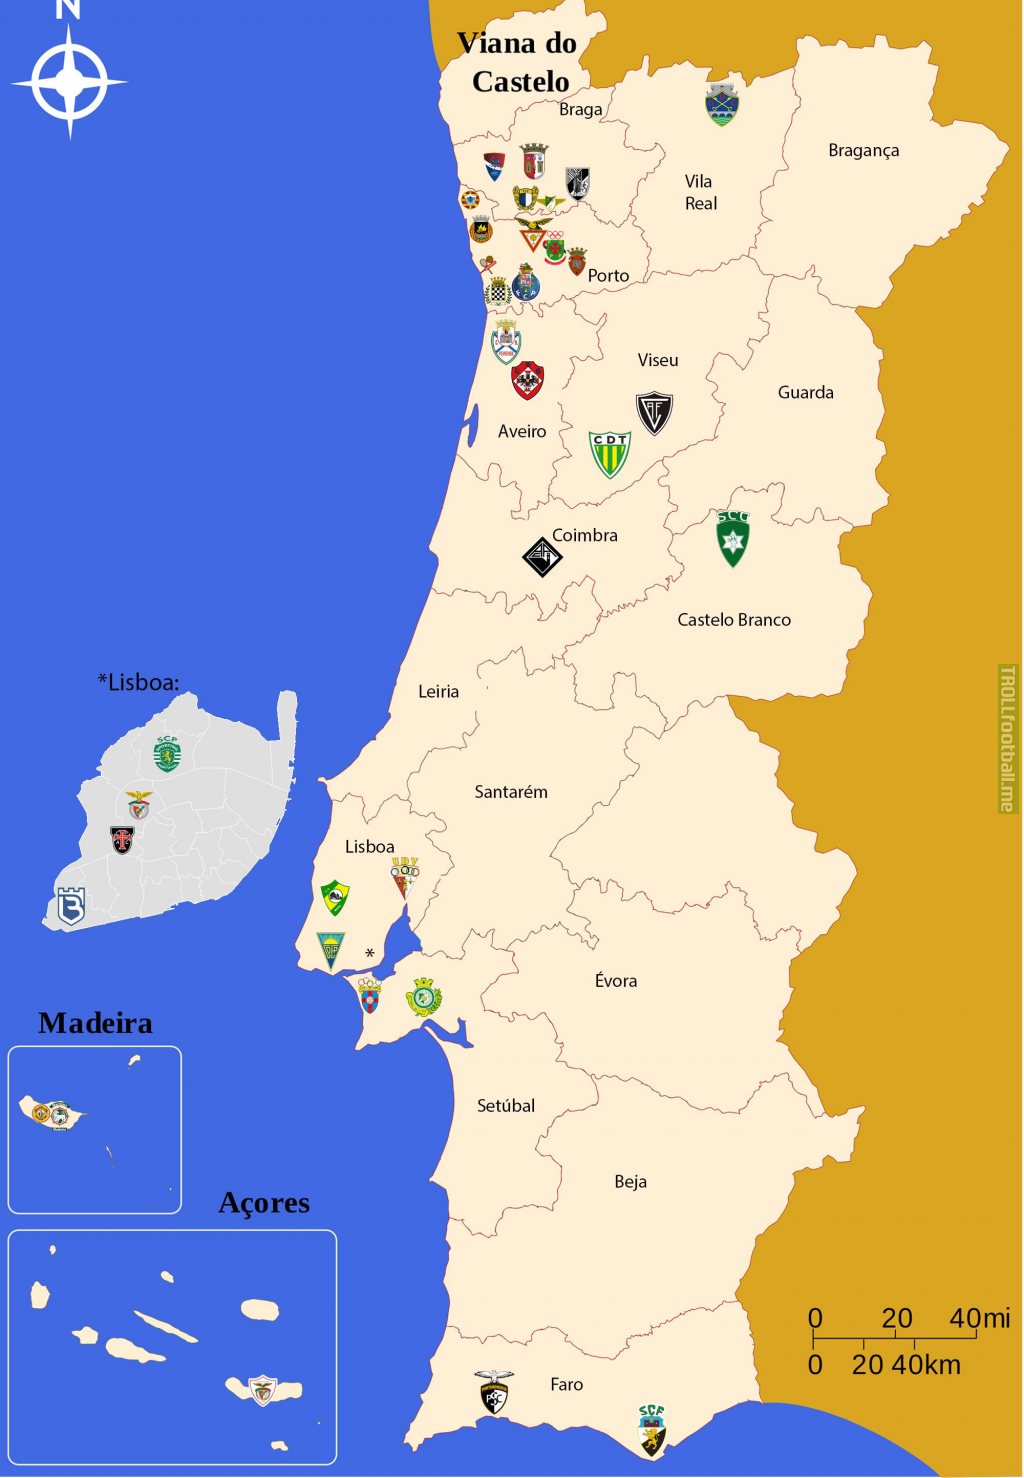 [OC] Location of every club in Portugal's top two tiers